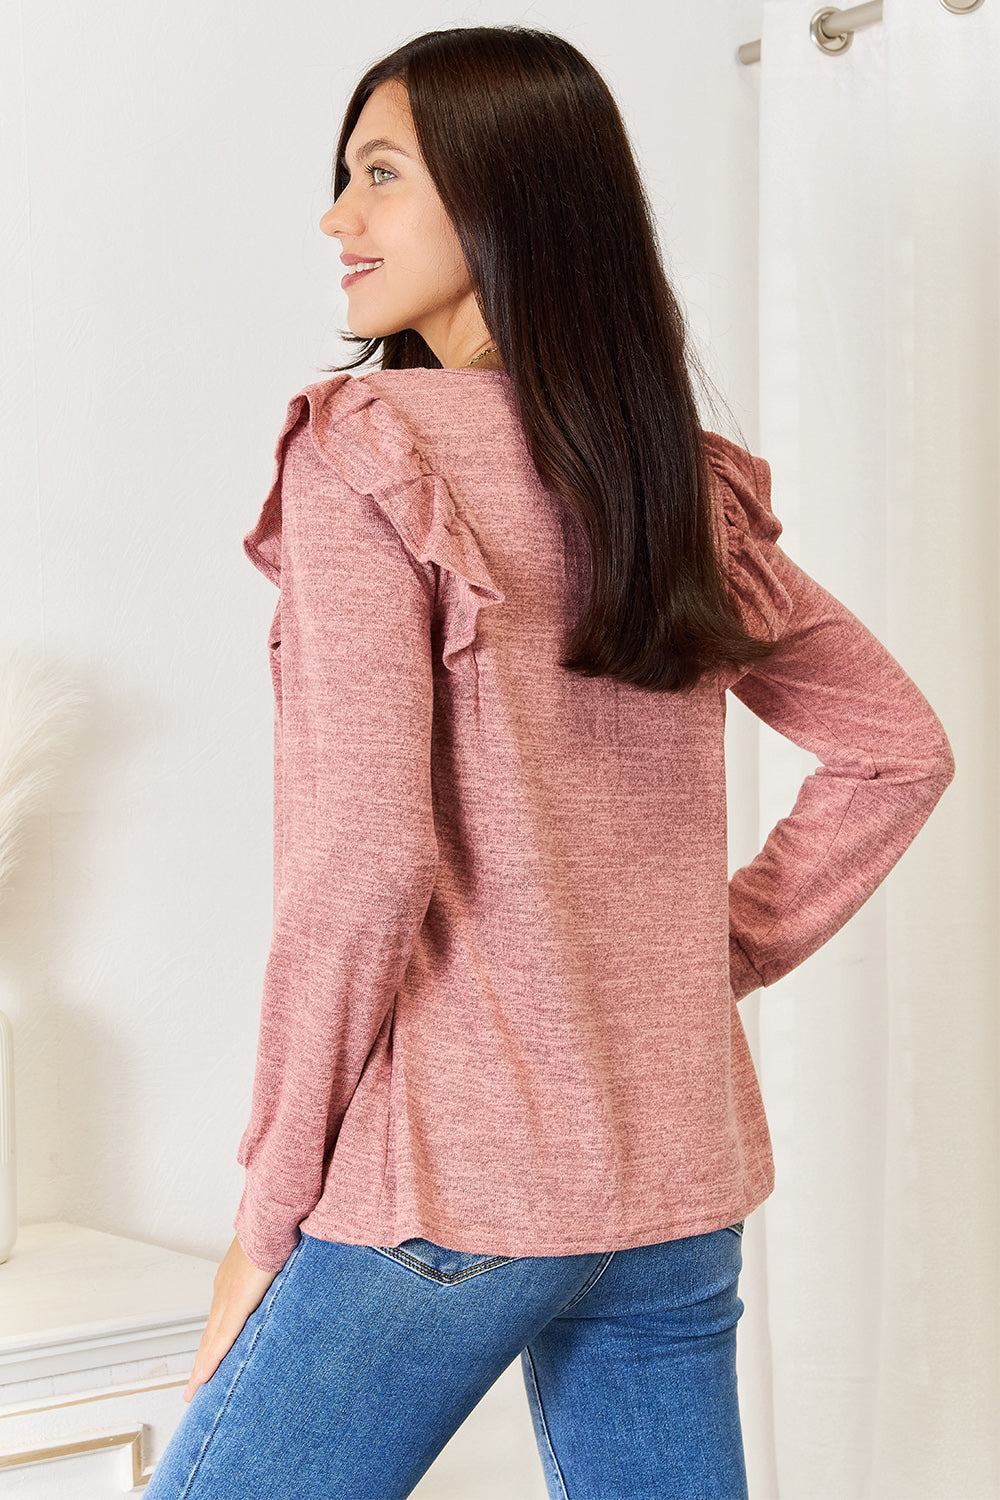 Long Sleeve Ruffled Top - Inspired Eye Boutique